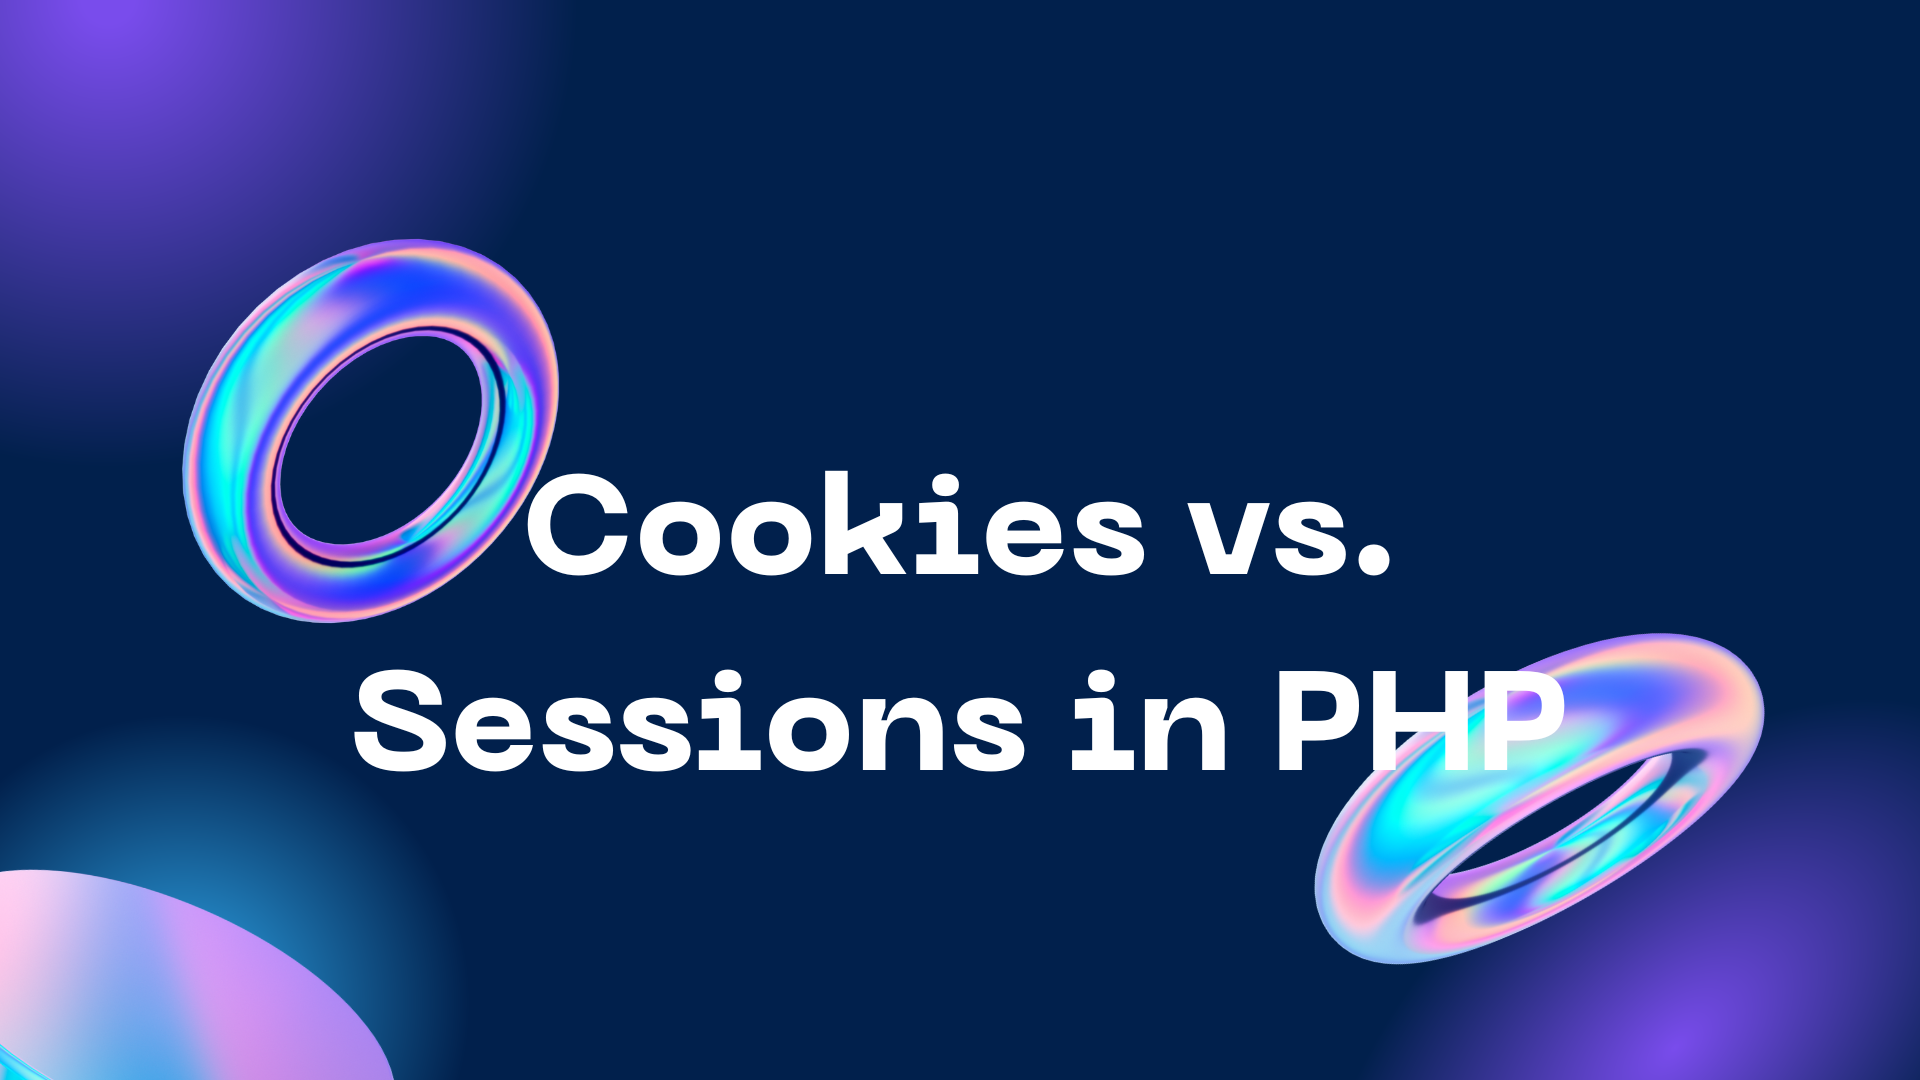 Cookies vs. Sessions in PHP